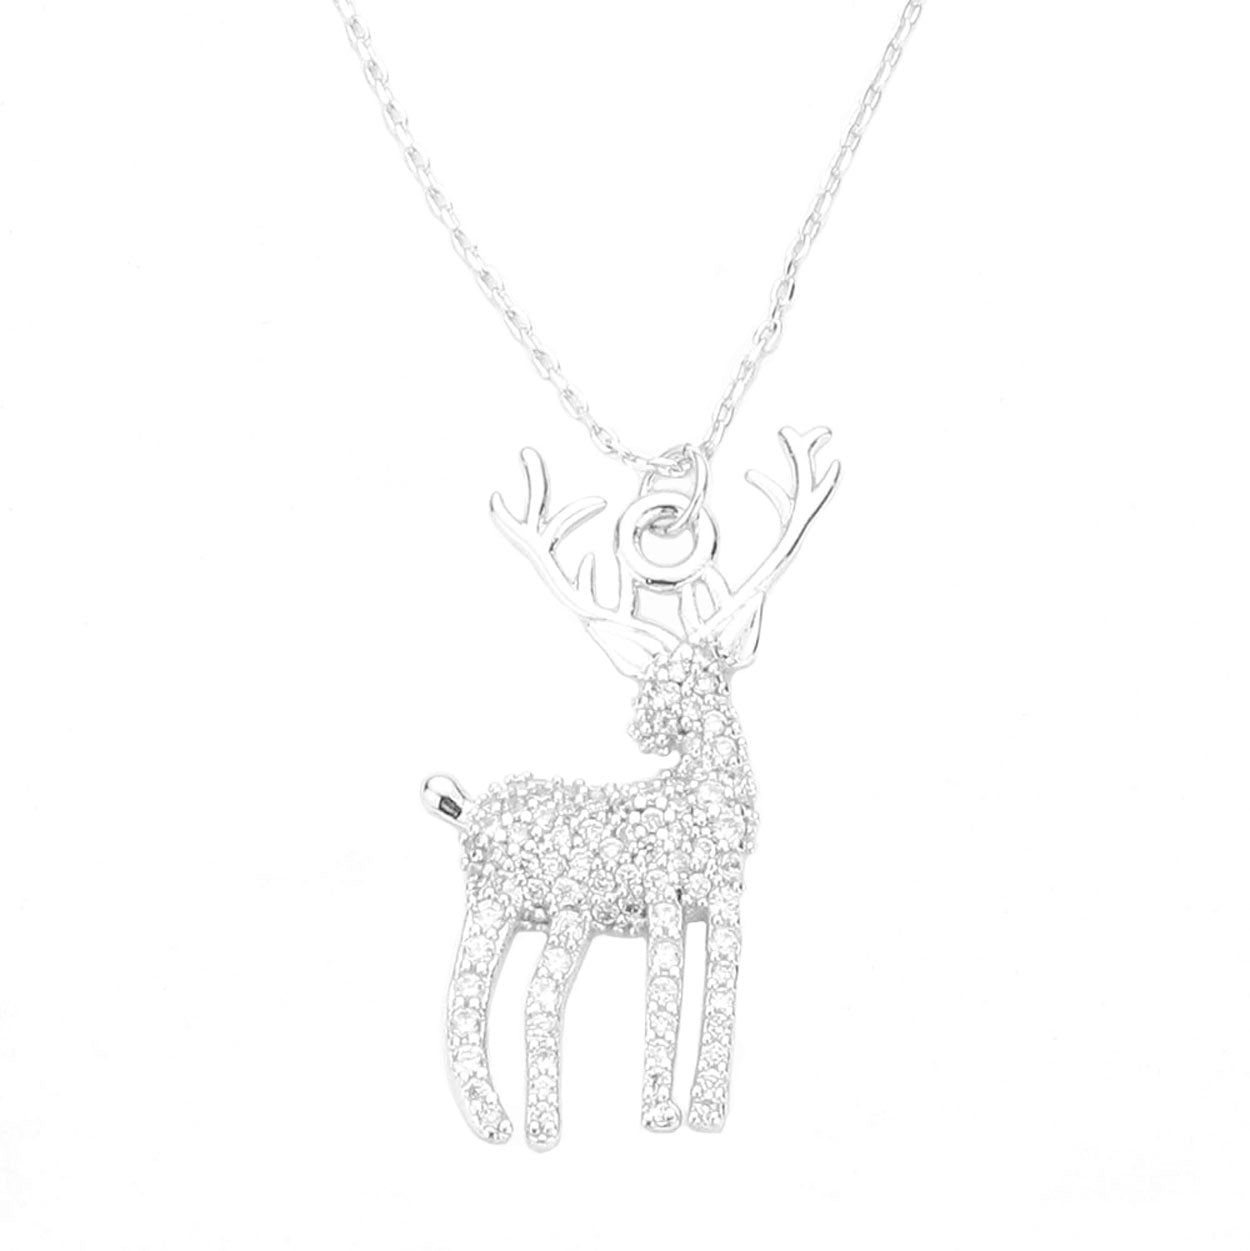 Rhodium White Gold Dipped CZ Reindeer Pendant Necklace, is a bold, eye-catching designed beautiful accessory for this Christmas.  These modern & cool-designed earrings feature everything from casual to sophisticated looks. Earrings that fit your lifestyle and make you stand out! It will be your new favorite accessory to amp up your confidence and complete your outfits. Coordinate with any ensemble from business casual to wear. 